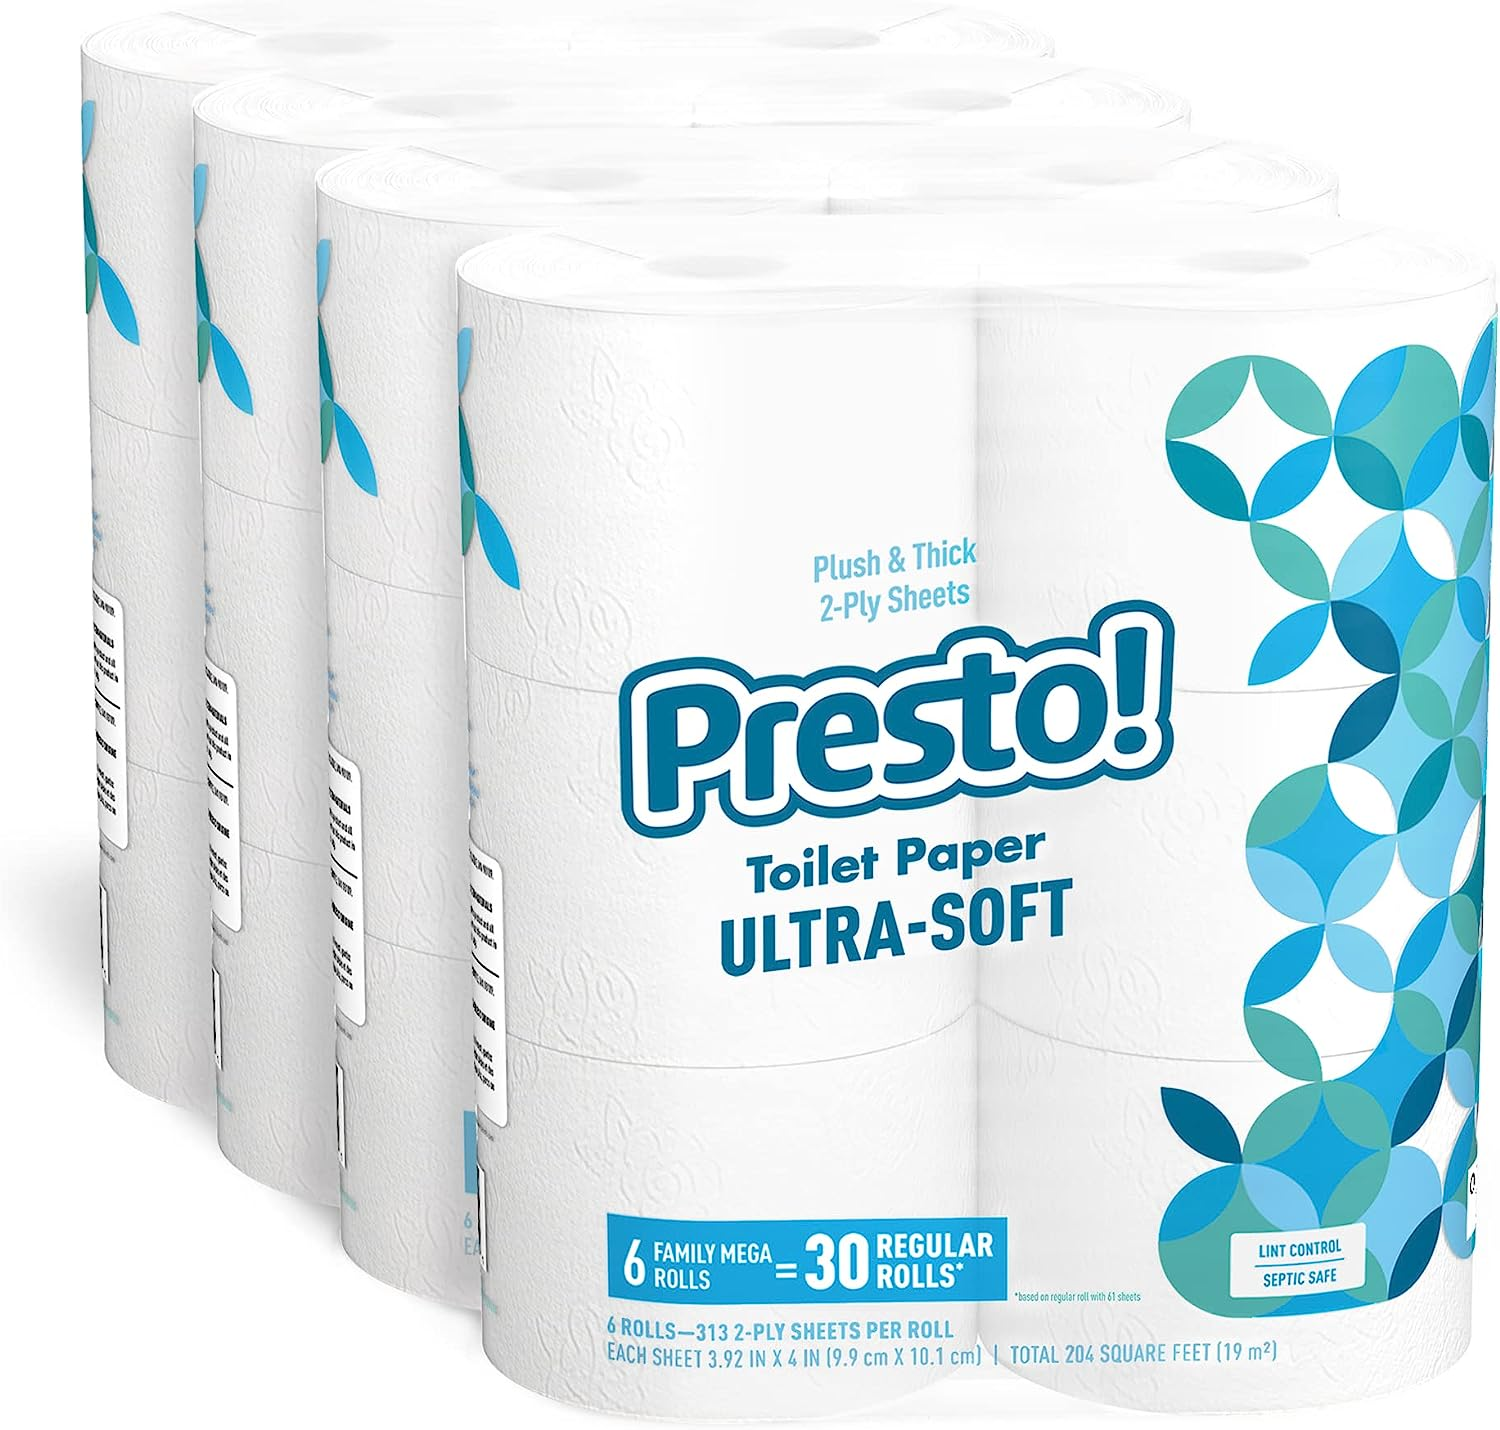 48-Rolls Presto! 2-Ply Ultra-Soft Toilet Paper (Unscented) $37.48 at Amazon